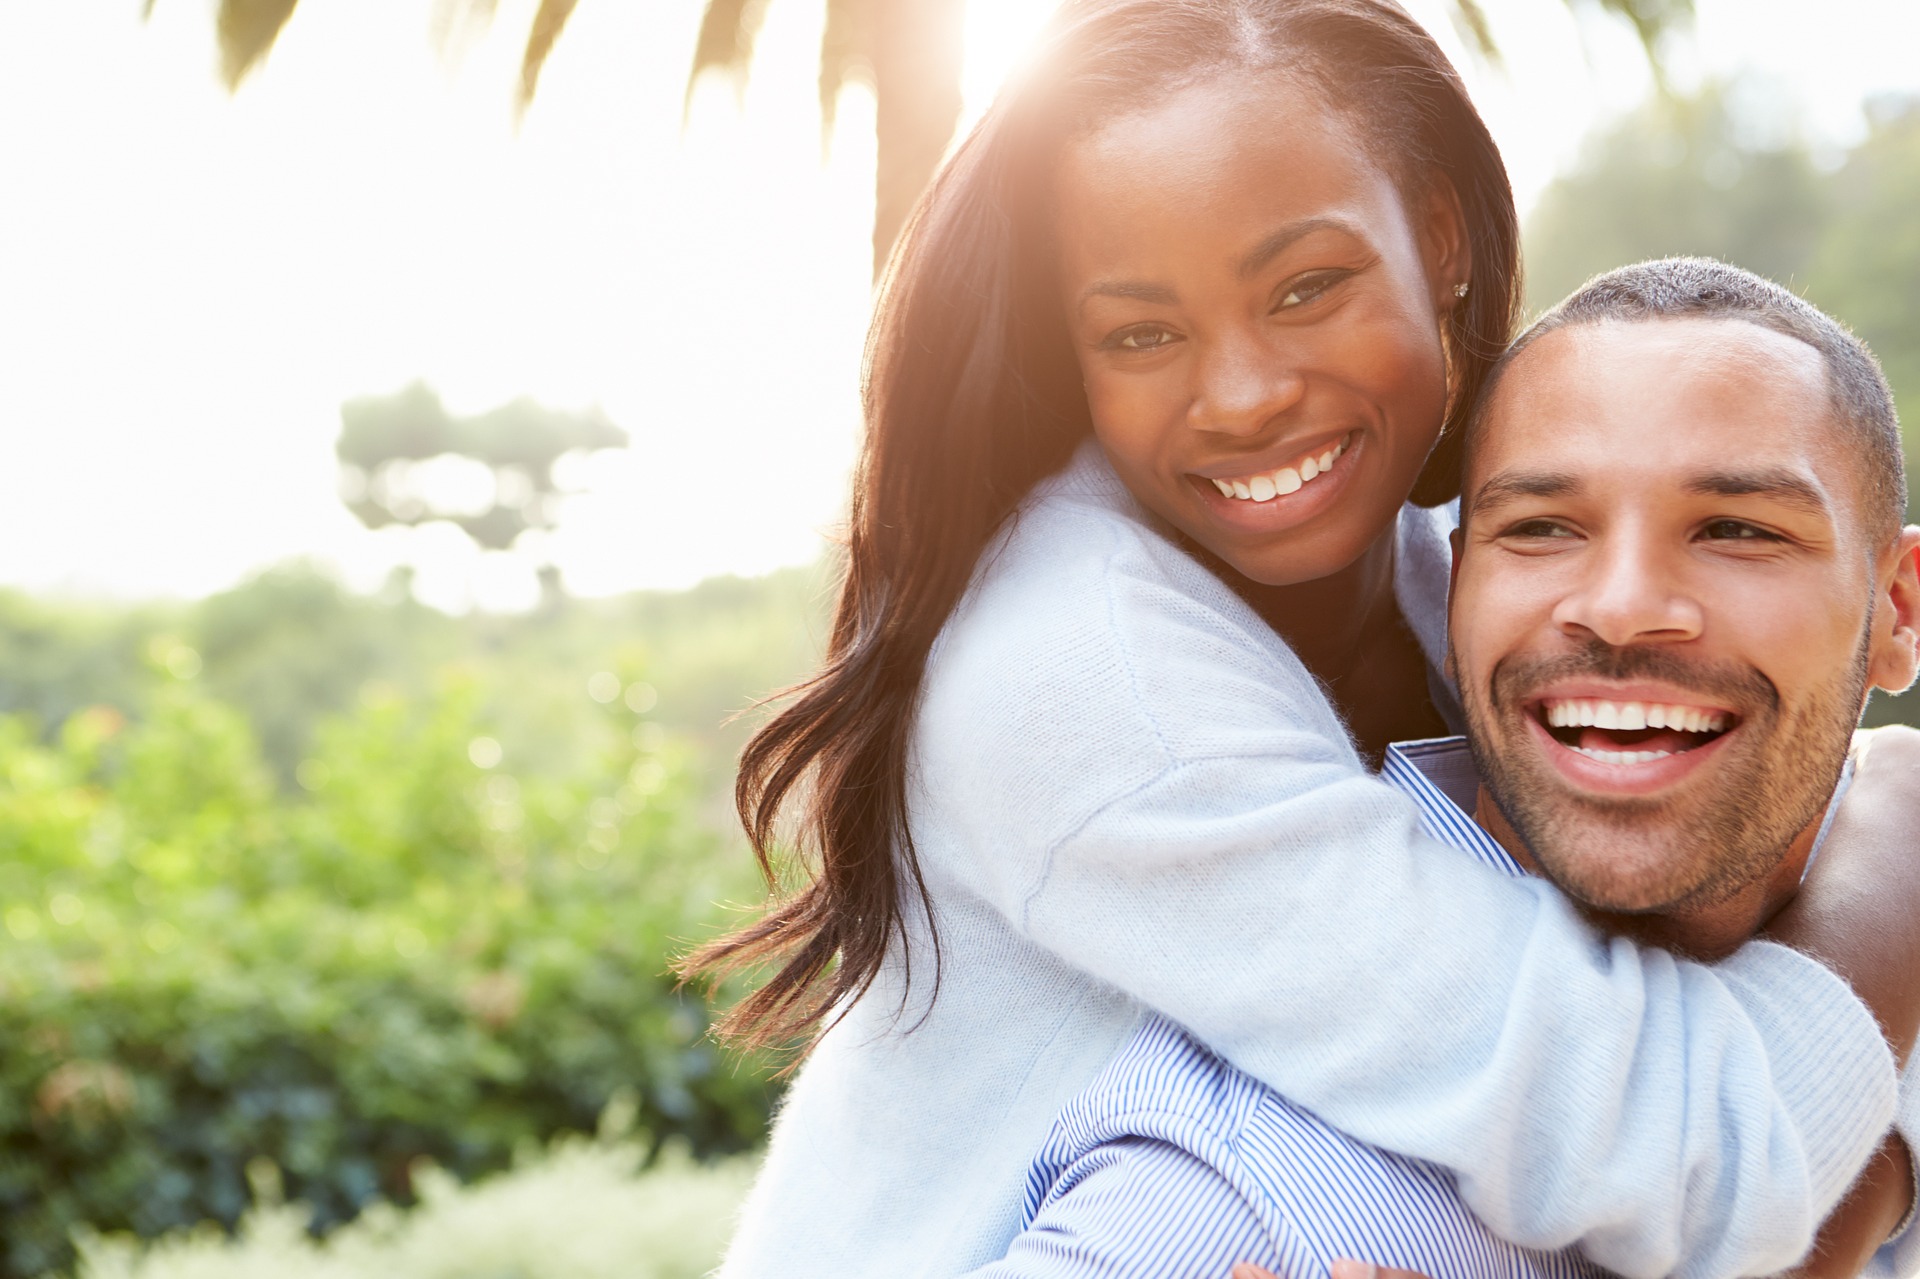 9 Little Things Happy Couples Do According To A Professional